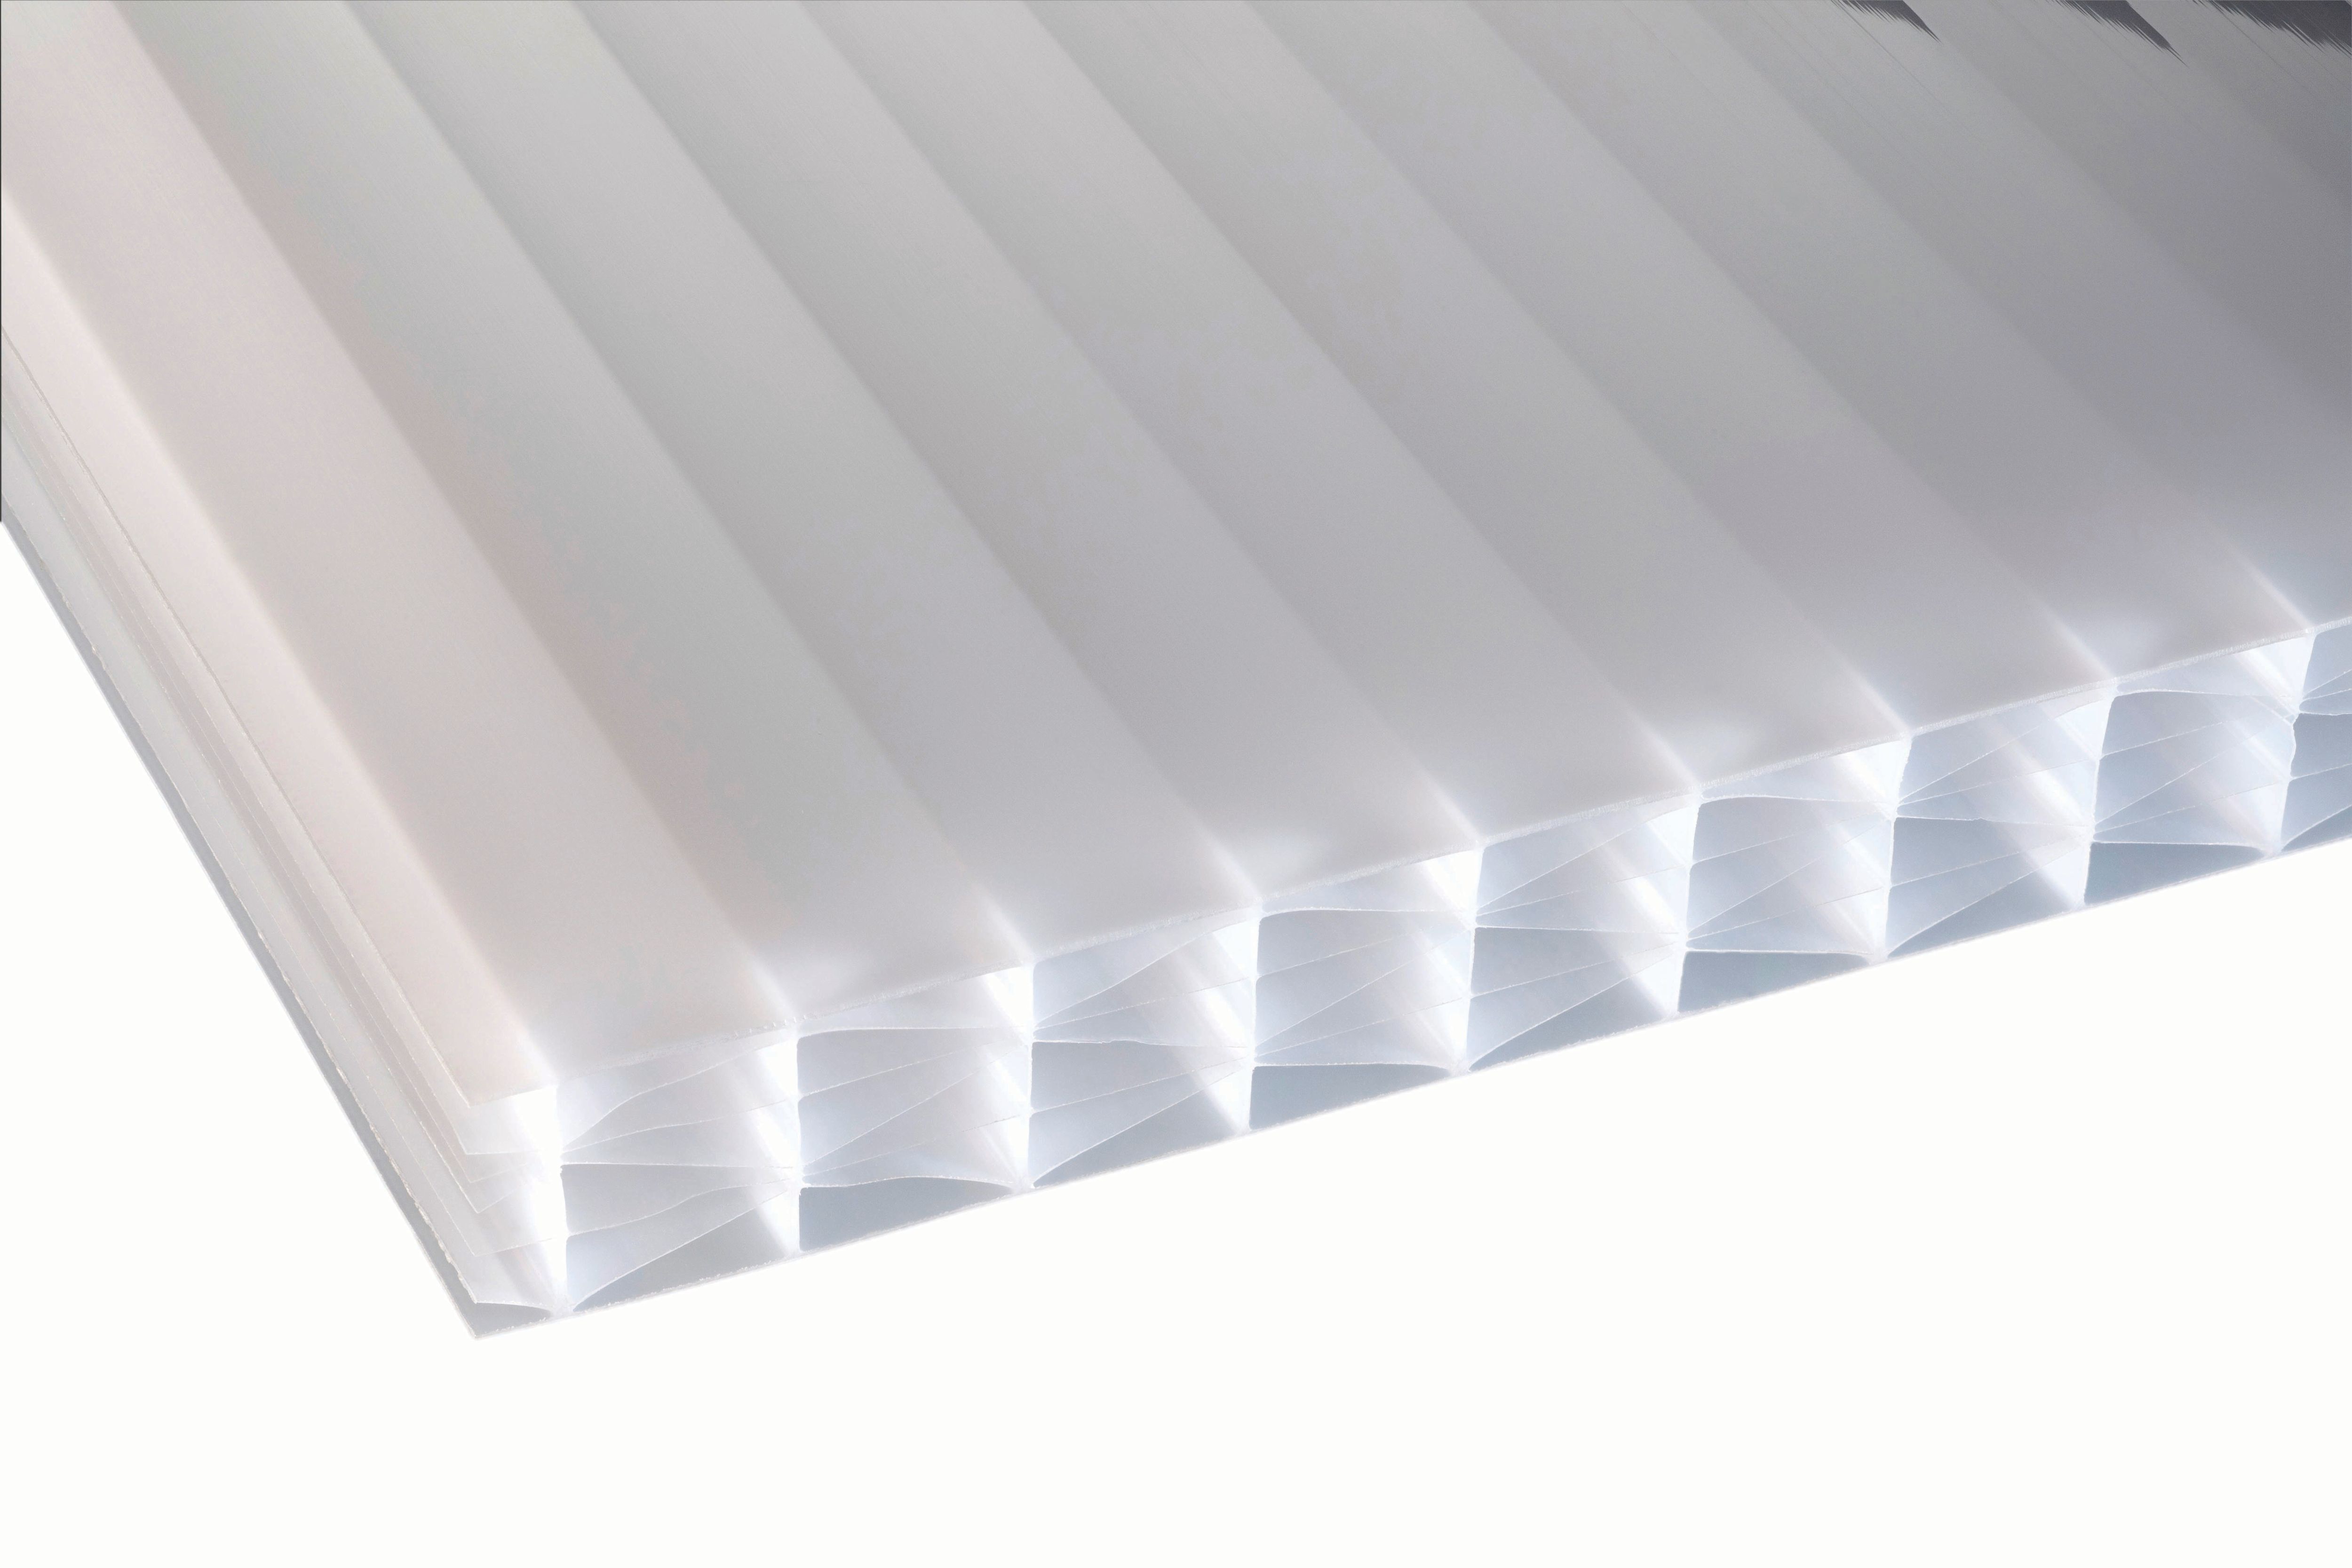 Image of 25mm Opal Multiwall Polycarbonate Sheet - 2500 x 800mm